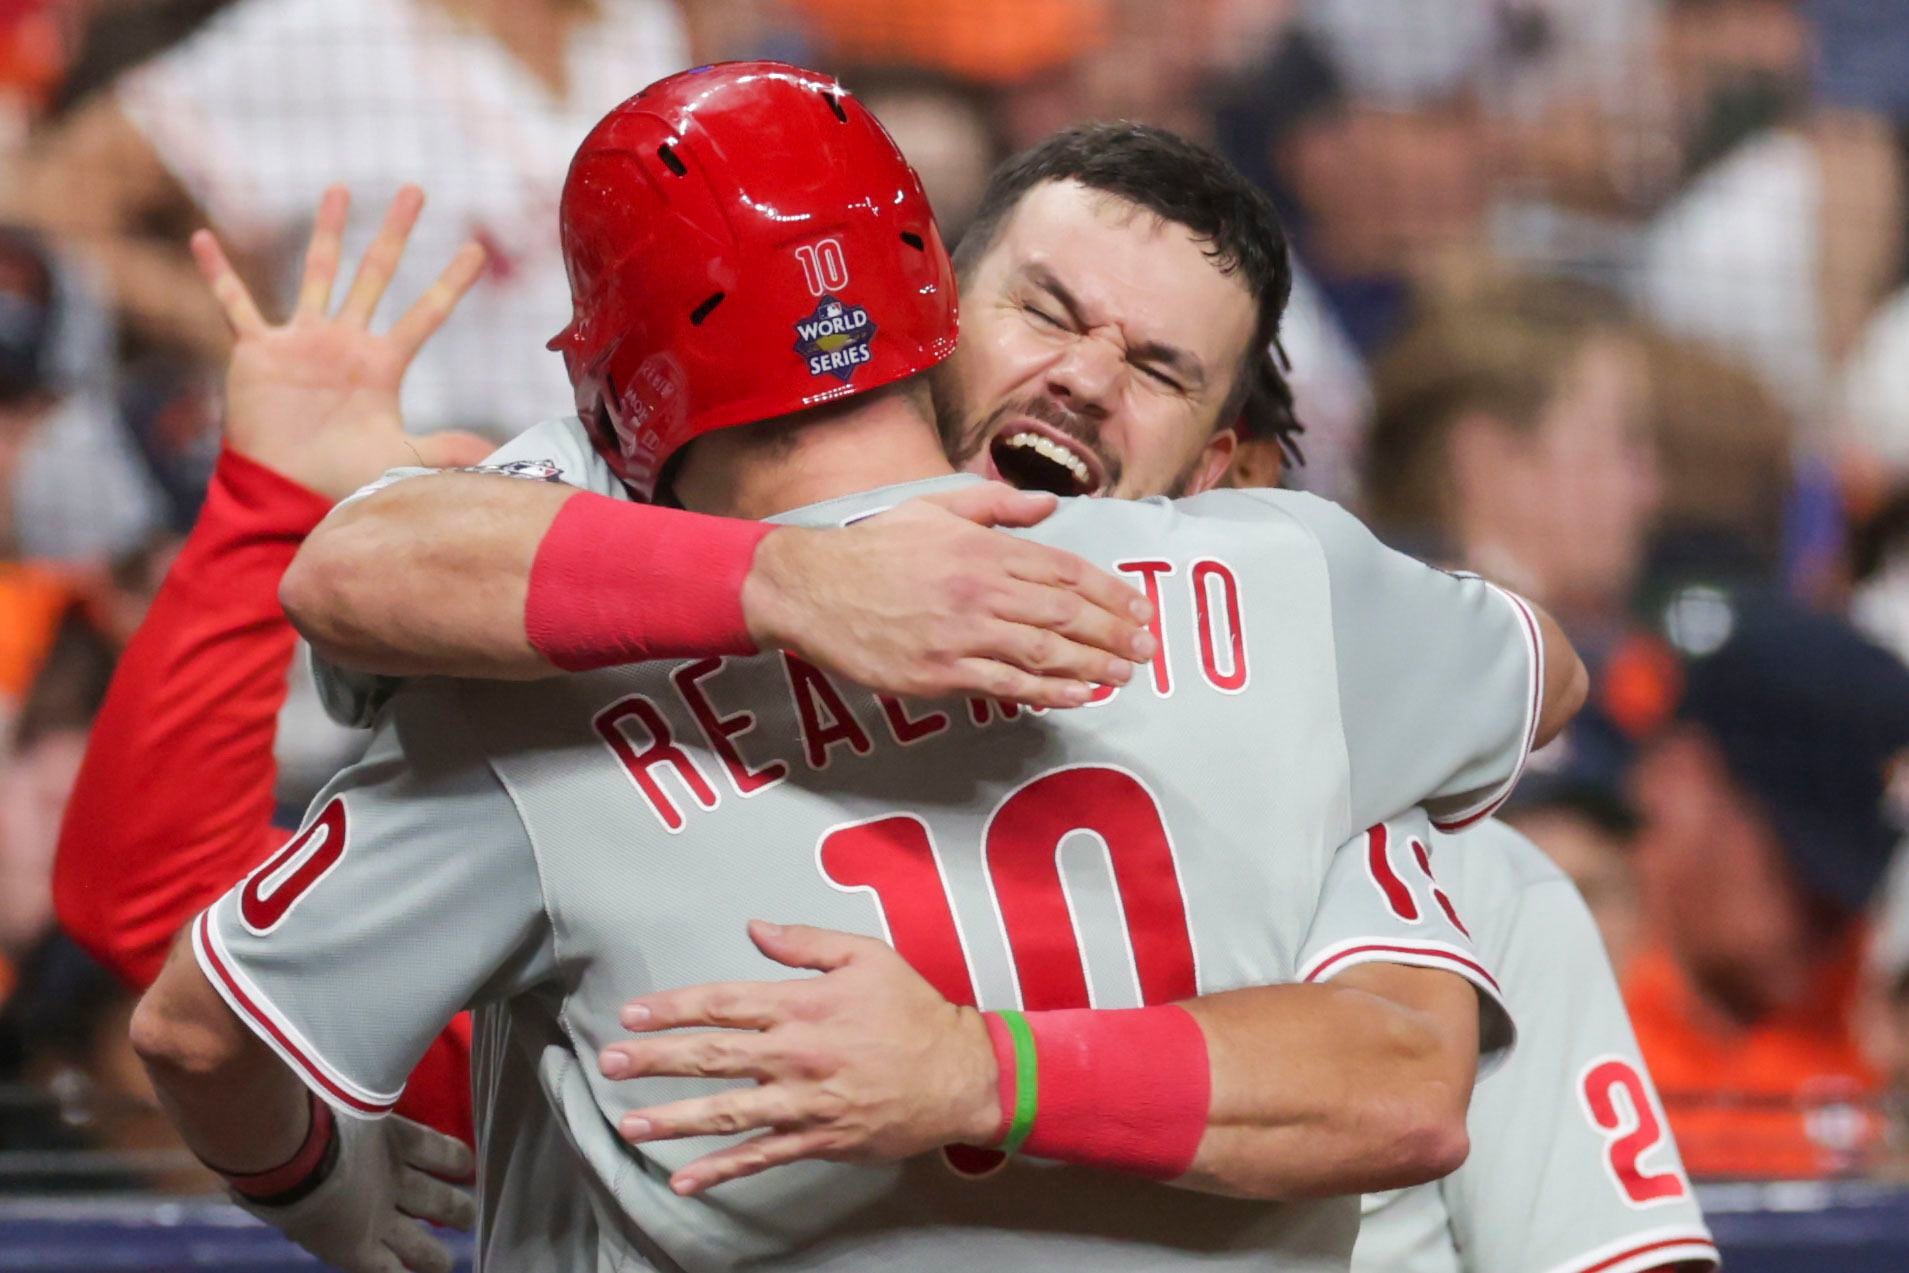 J.T. Realmuto caps Phillies comeback with homer in the 10th to beat Astros,  6-5, in World Series opener